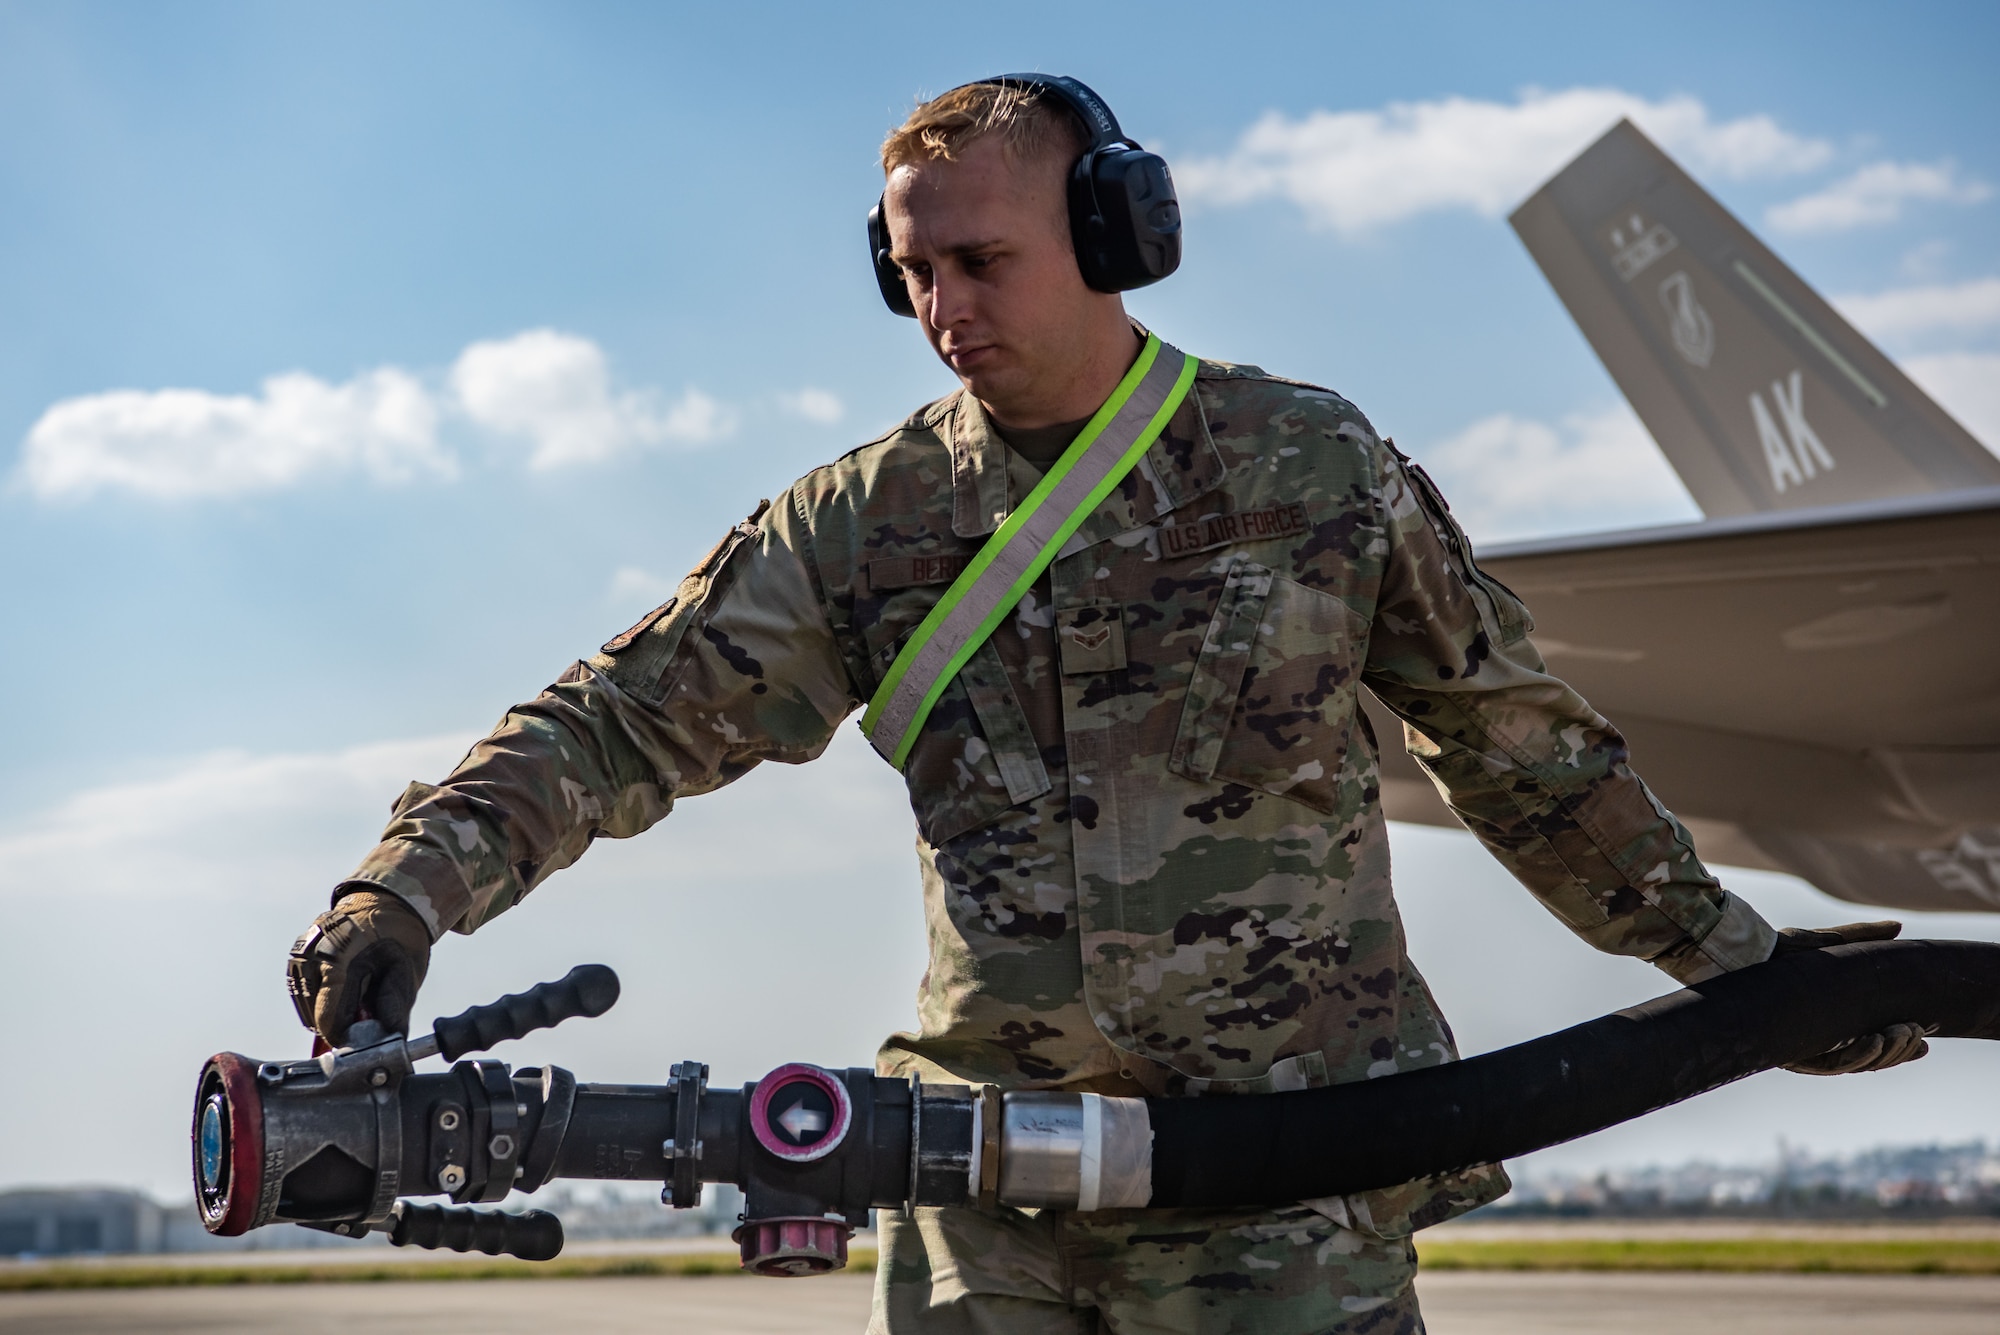 An Airman carries a refueling nozzle.